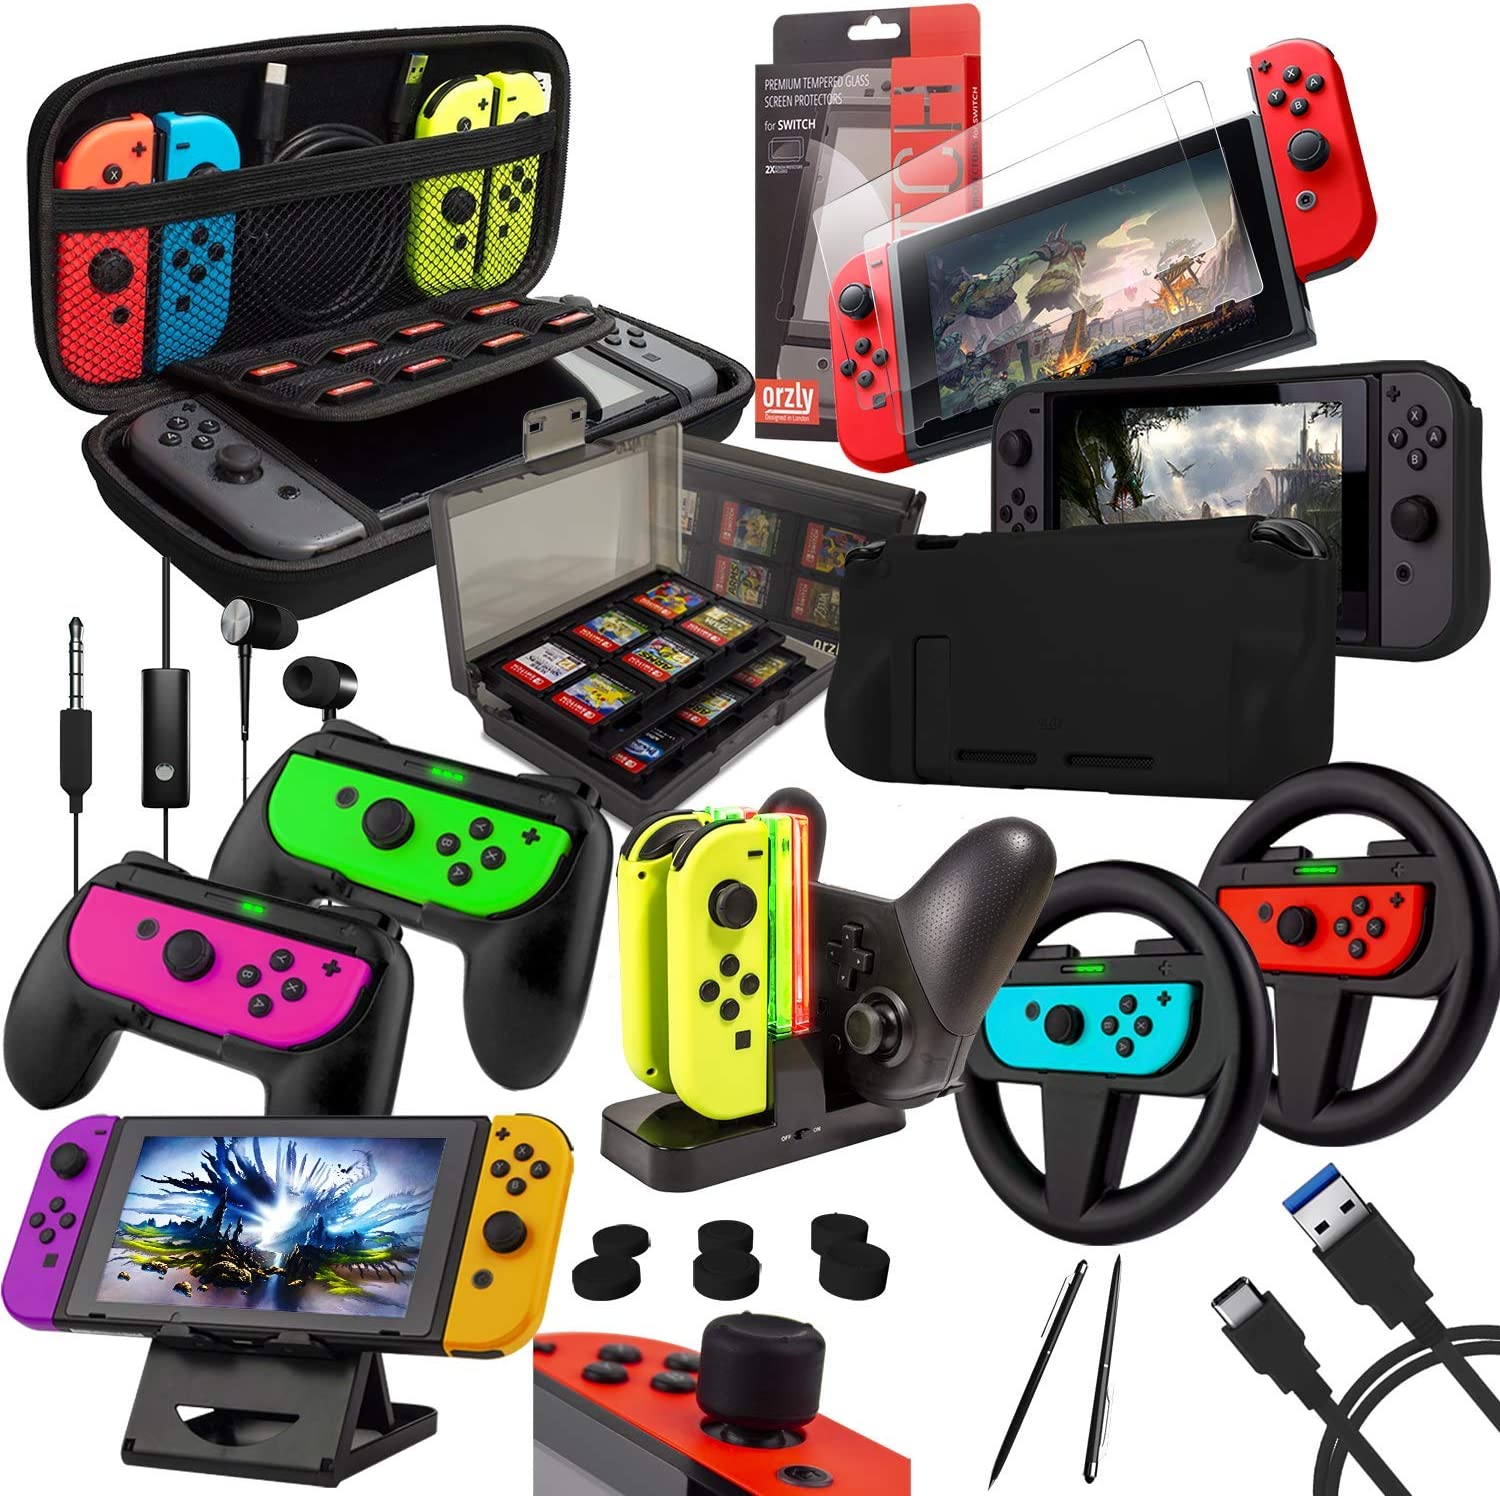 Orzly accessory bundle kit for Nintendo Switch.